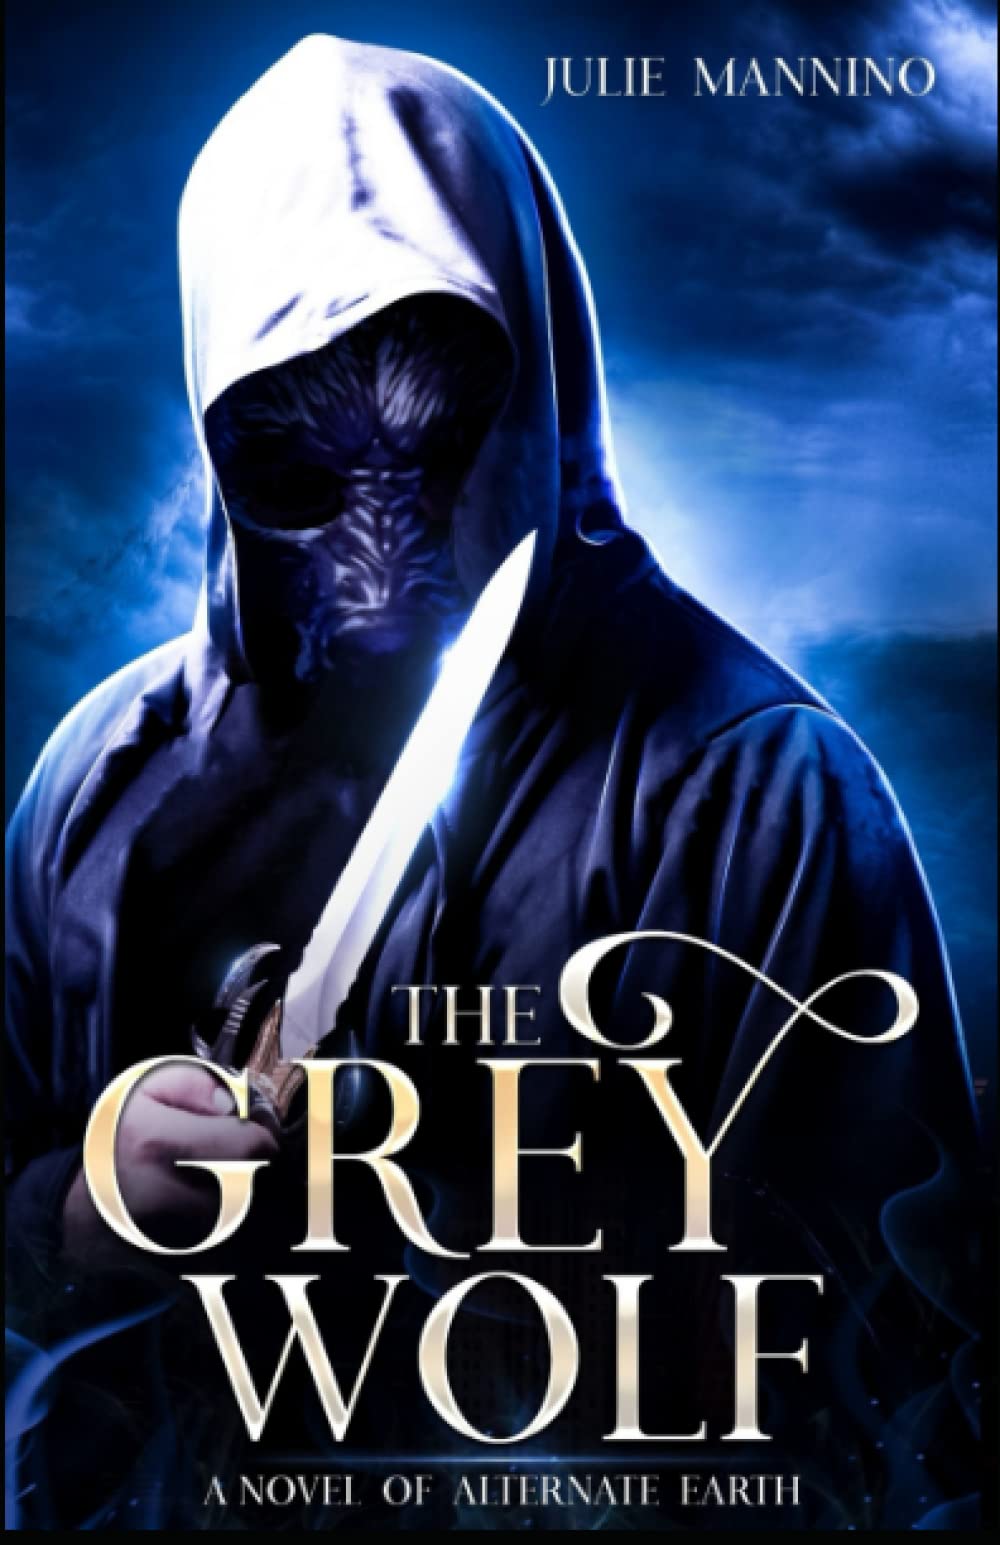 The Grey Wolf by Julie Mannino Free Download